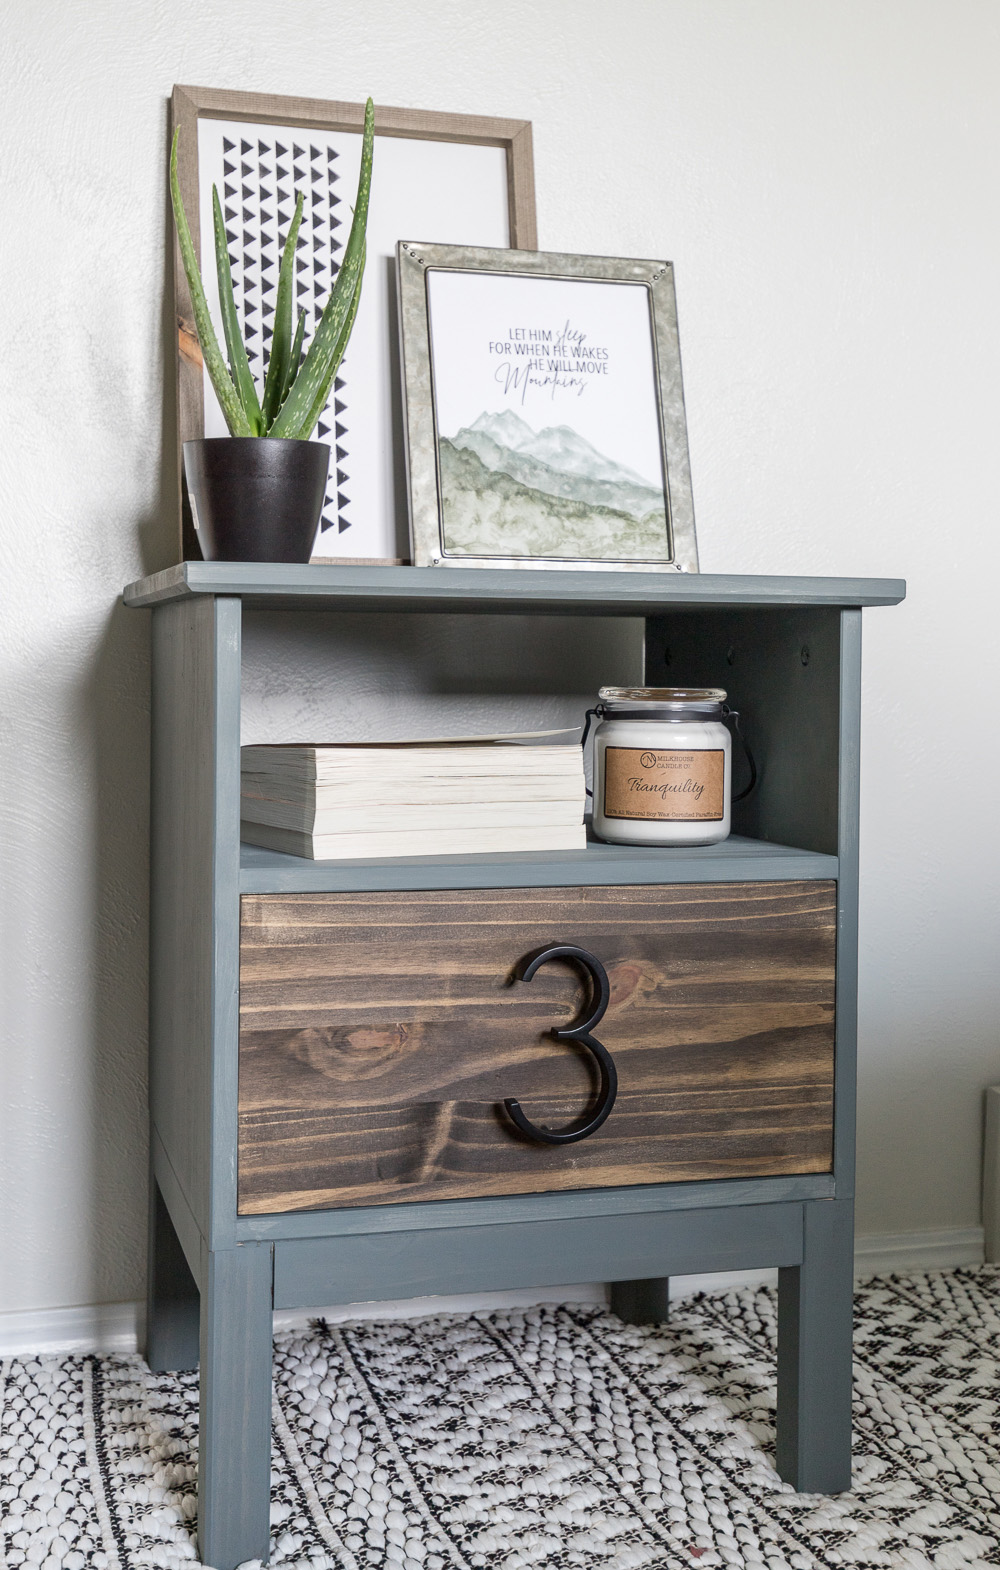 Farmhouse meets modern with this bedside table - a DIY makeover that adds tons of style to the room